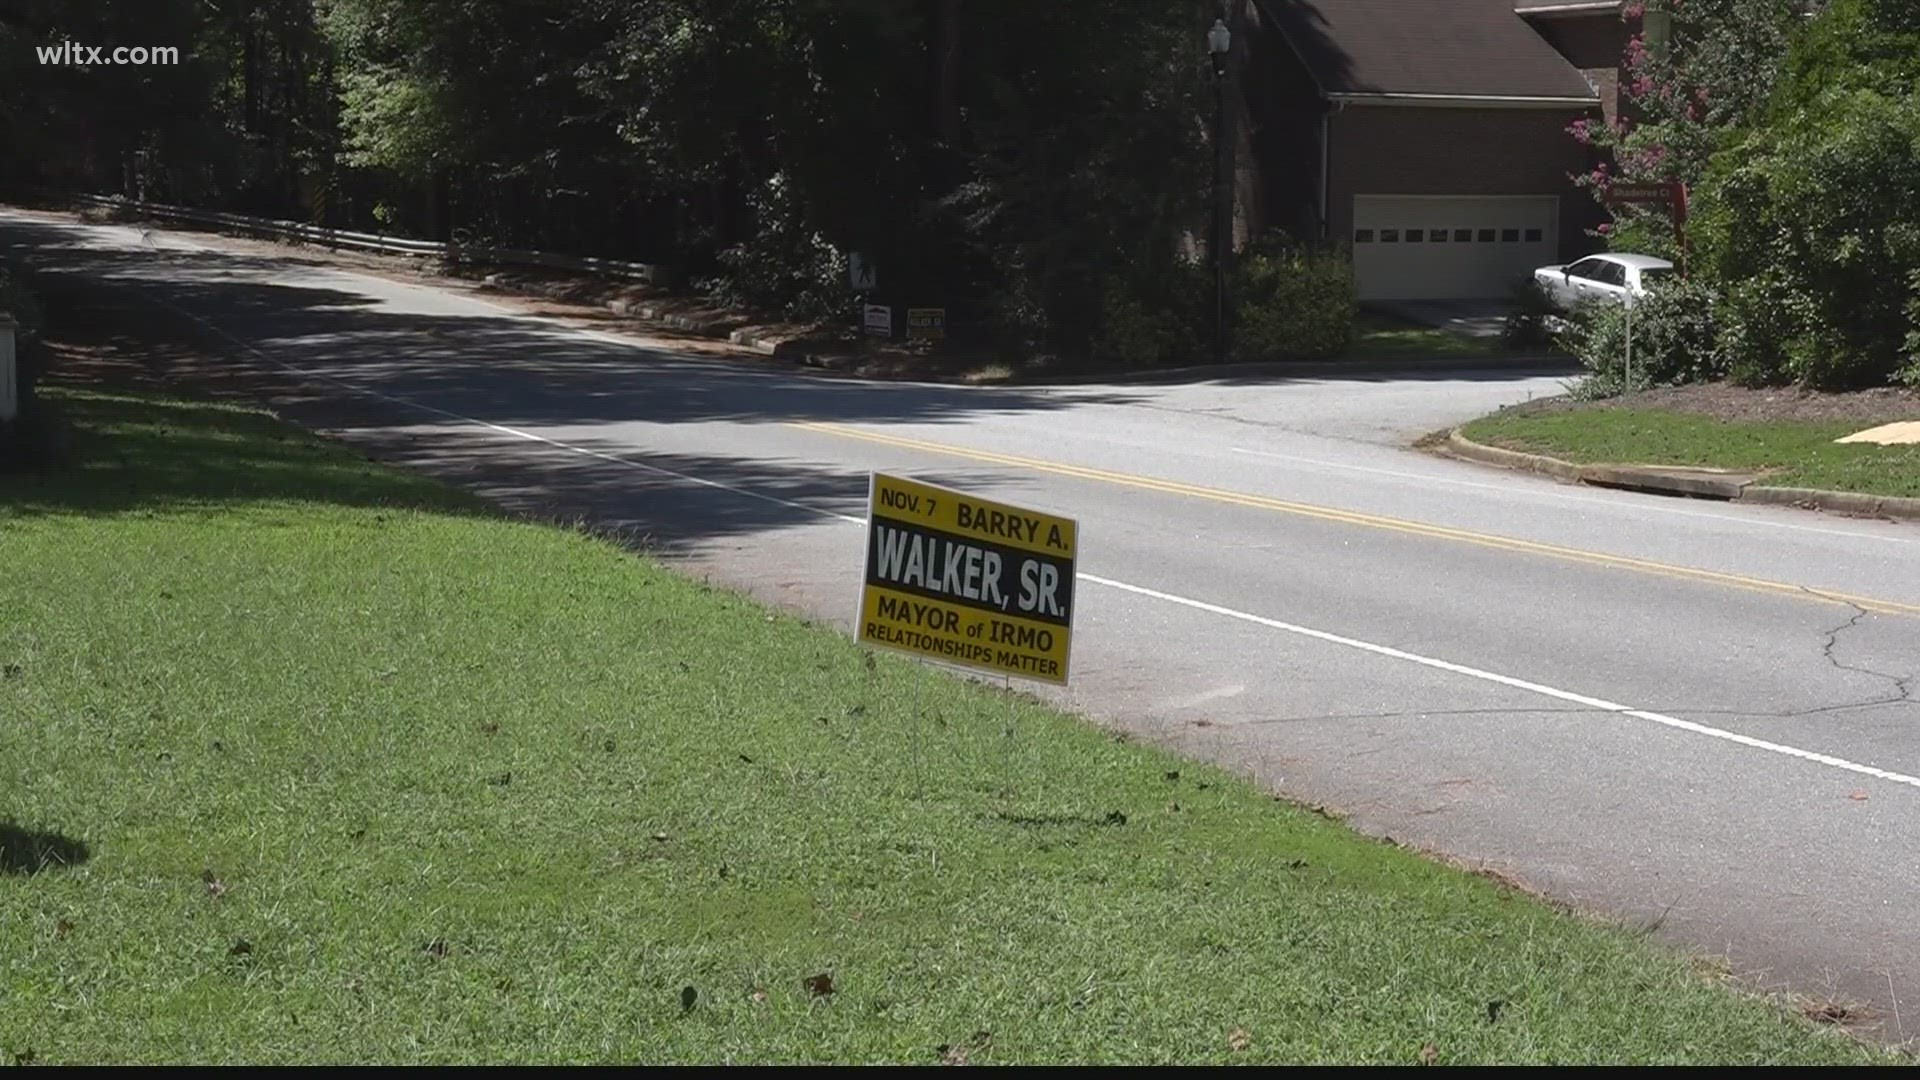 Mark Passmore tells News 19 he put up a mayoral election sign in his yard last Thursday, and one day later, he got a letter from his HOA demanding he take it down.